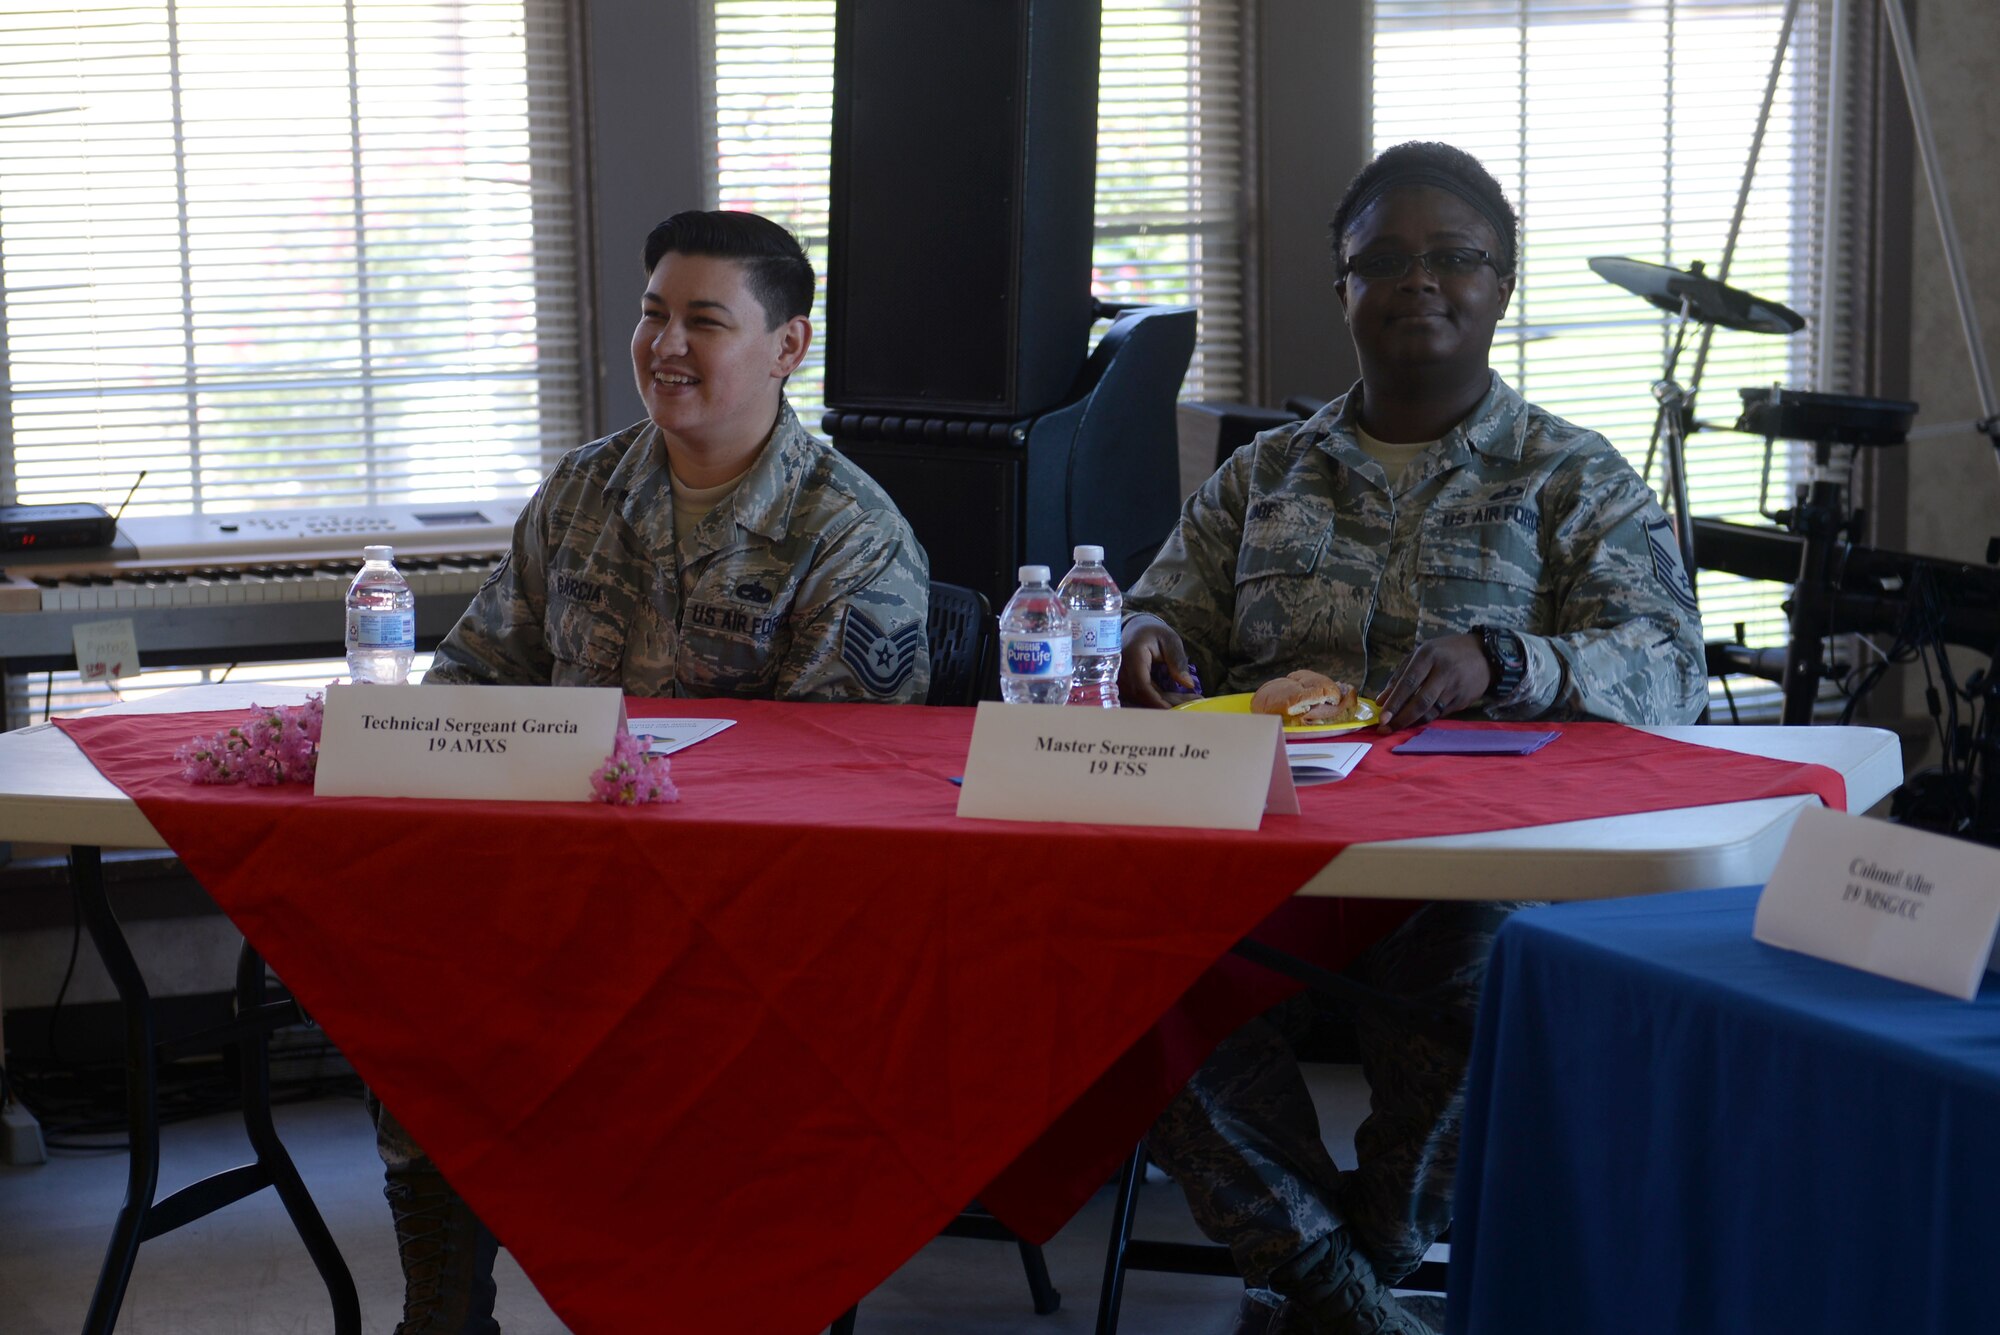 Two women wearing the Airmen Battle Uniform sit at a table with a red table cloth and smile at the camera.